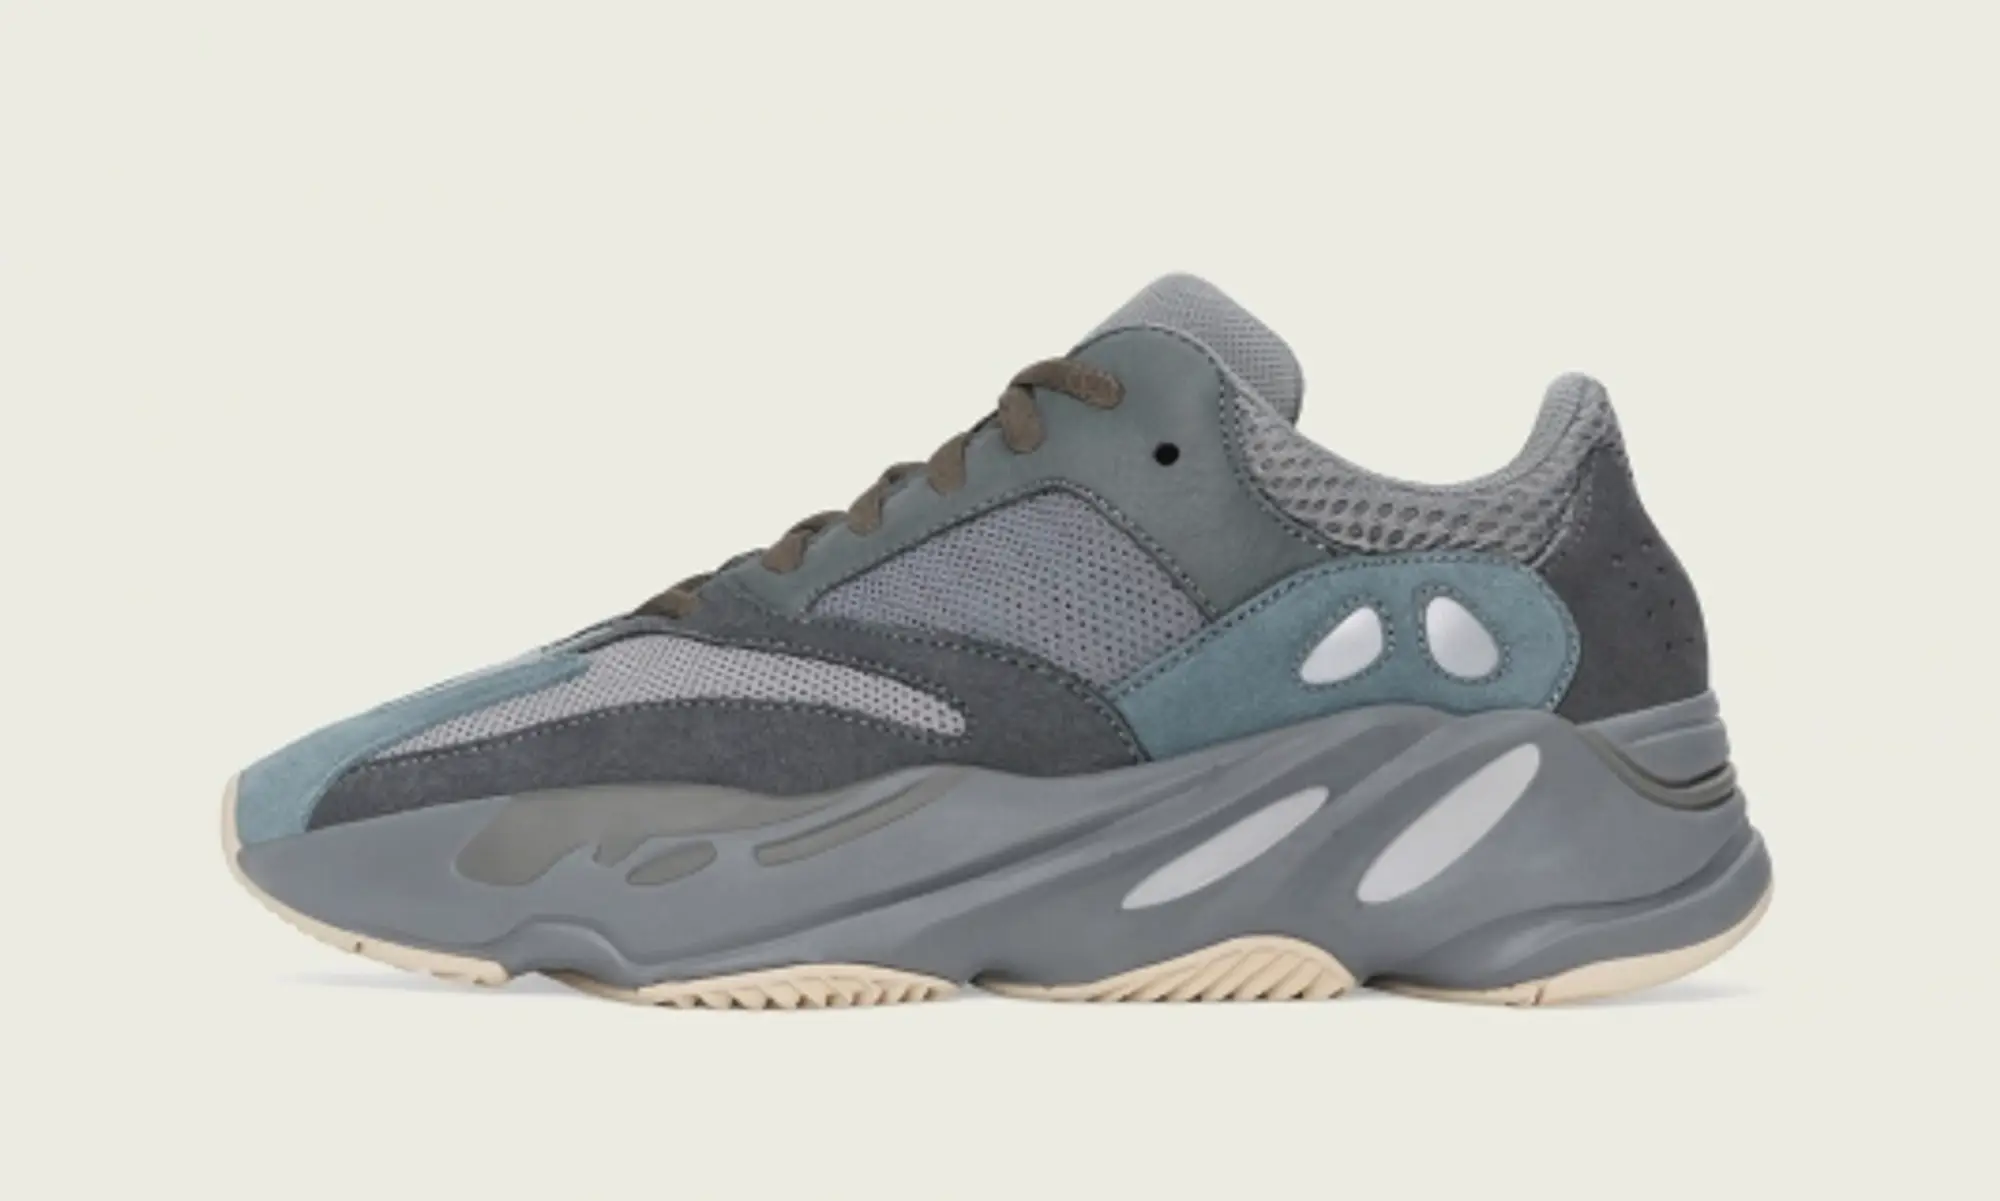 adidas Yeezy Boost 700 Teal Blue Shoes